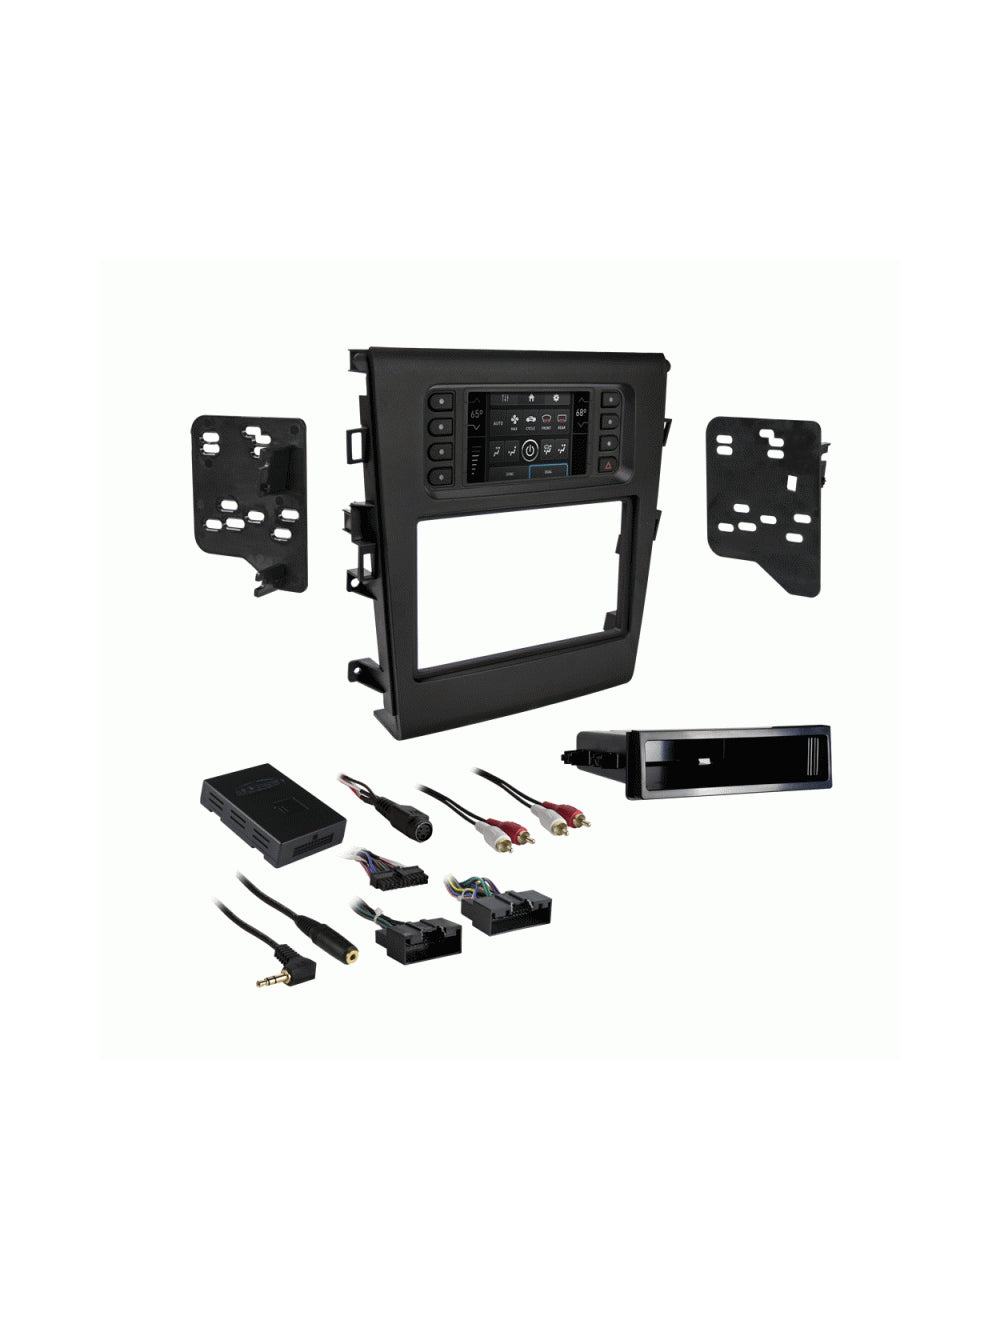 Metra 99-5841B Single/Double DIN Dash Kit for Select 2013-Up Ford Fusion Vehicles